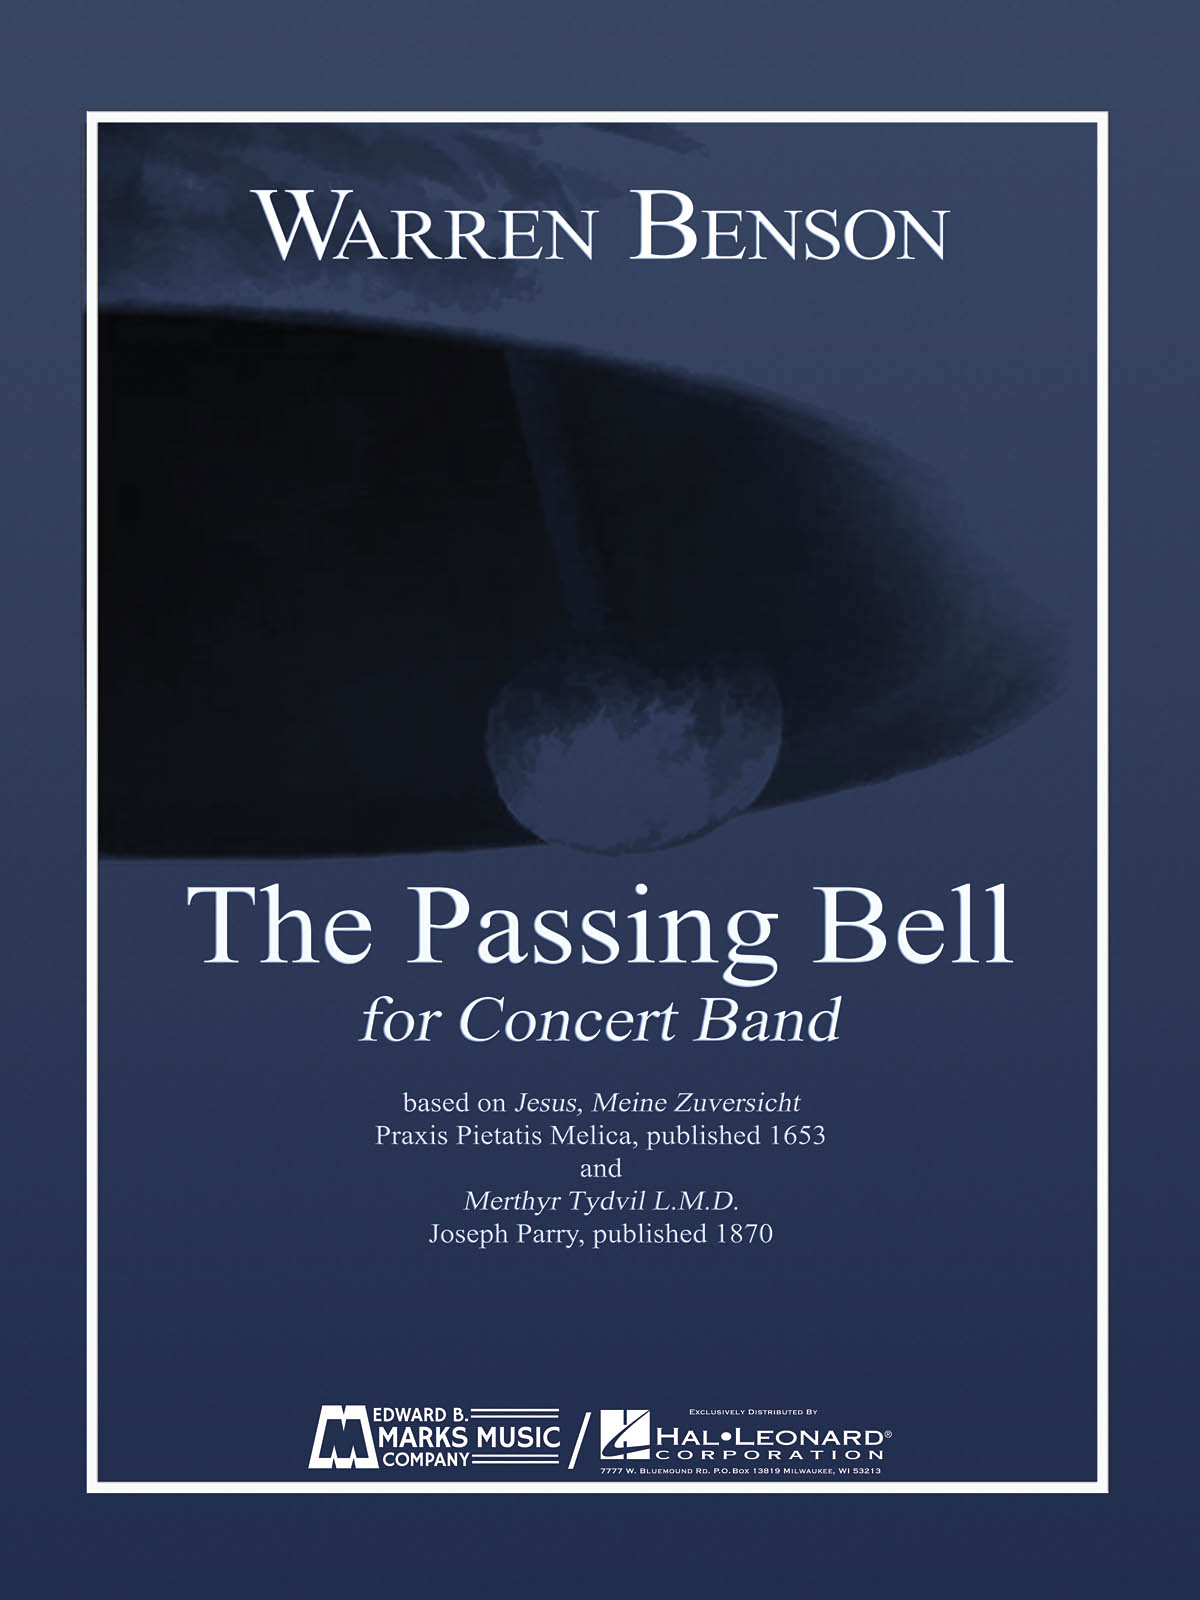 The Passing Bell